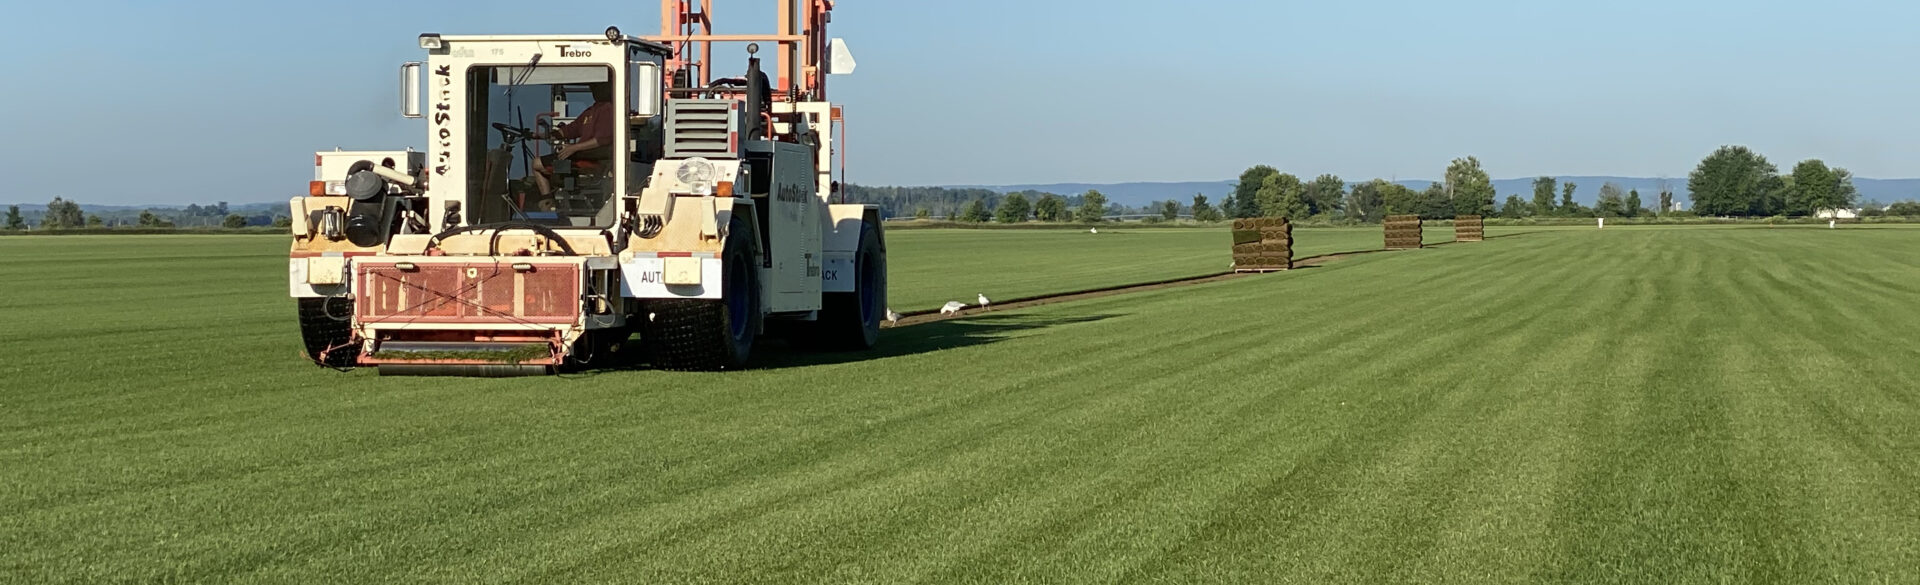 A large turf harvester is operating in a vast, neatly trimmed grass field under a clear blue sky, with stacks of harvested turf in the background.